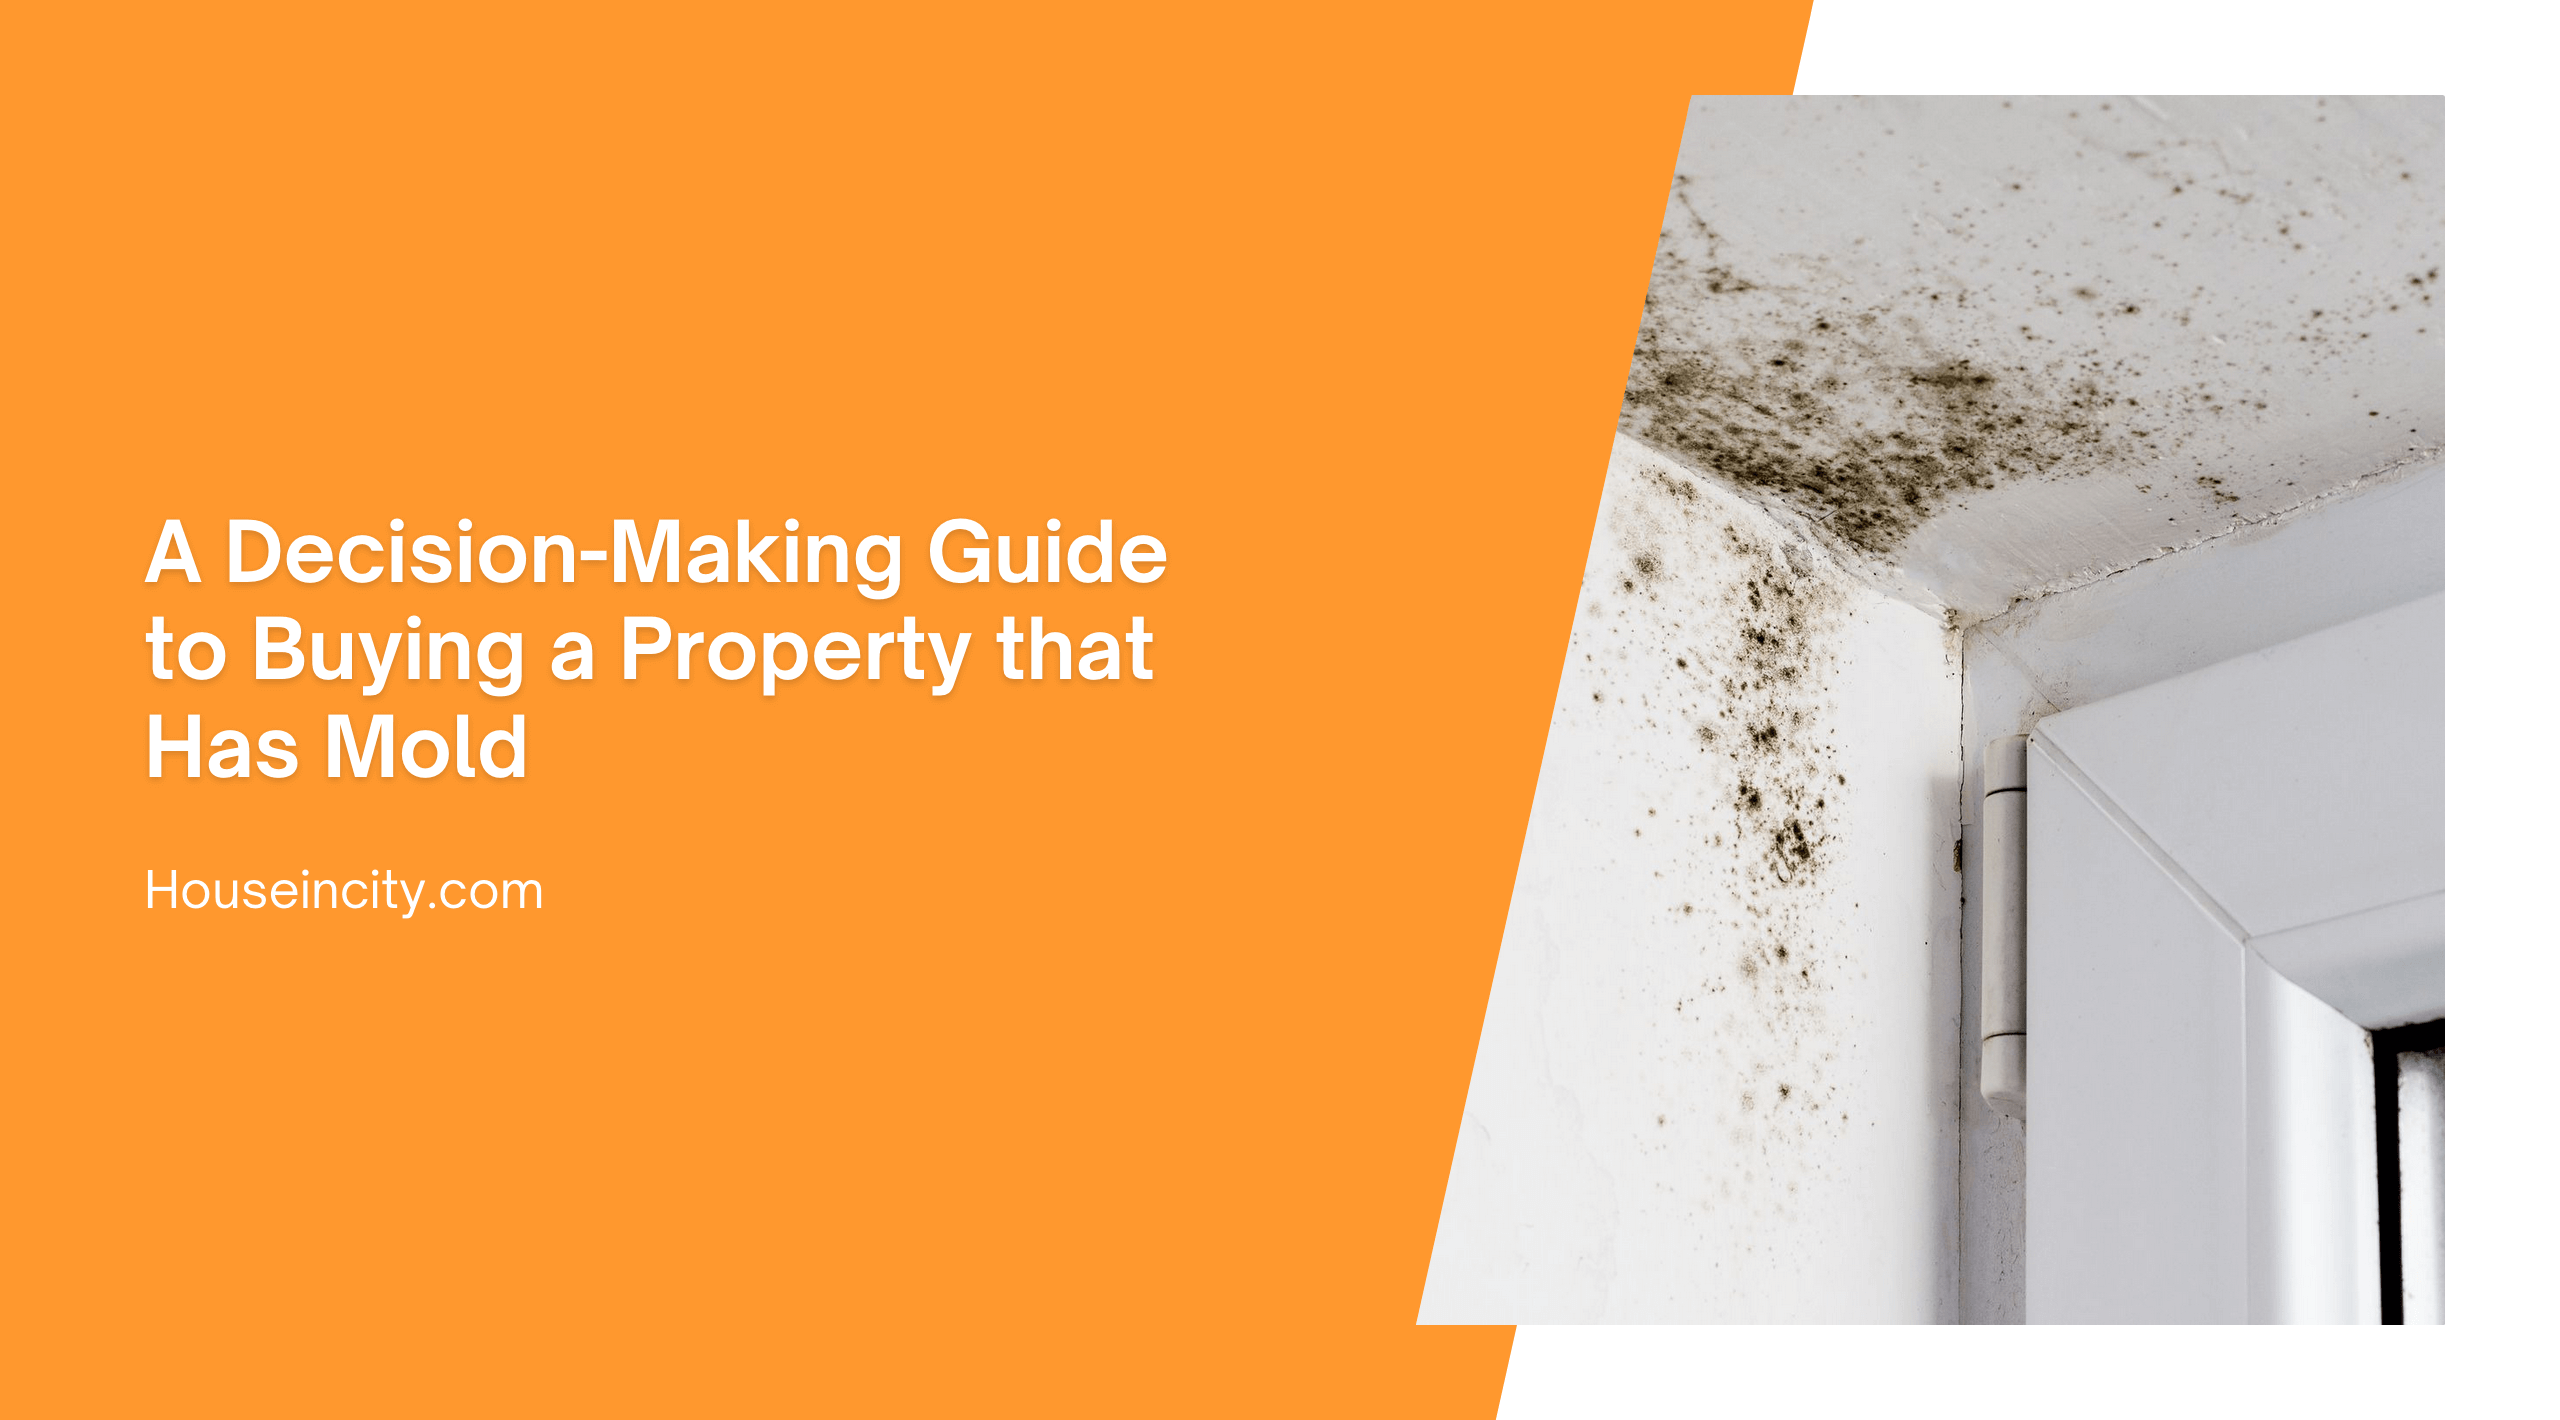 A Decision-Making Guide to Buying a Property that Has Mold